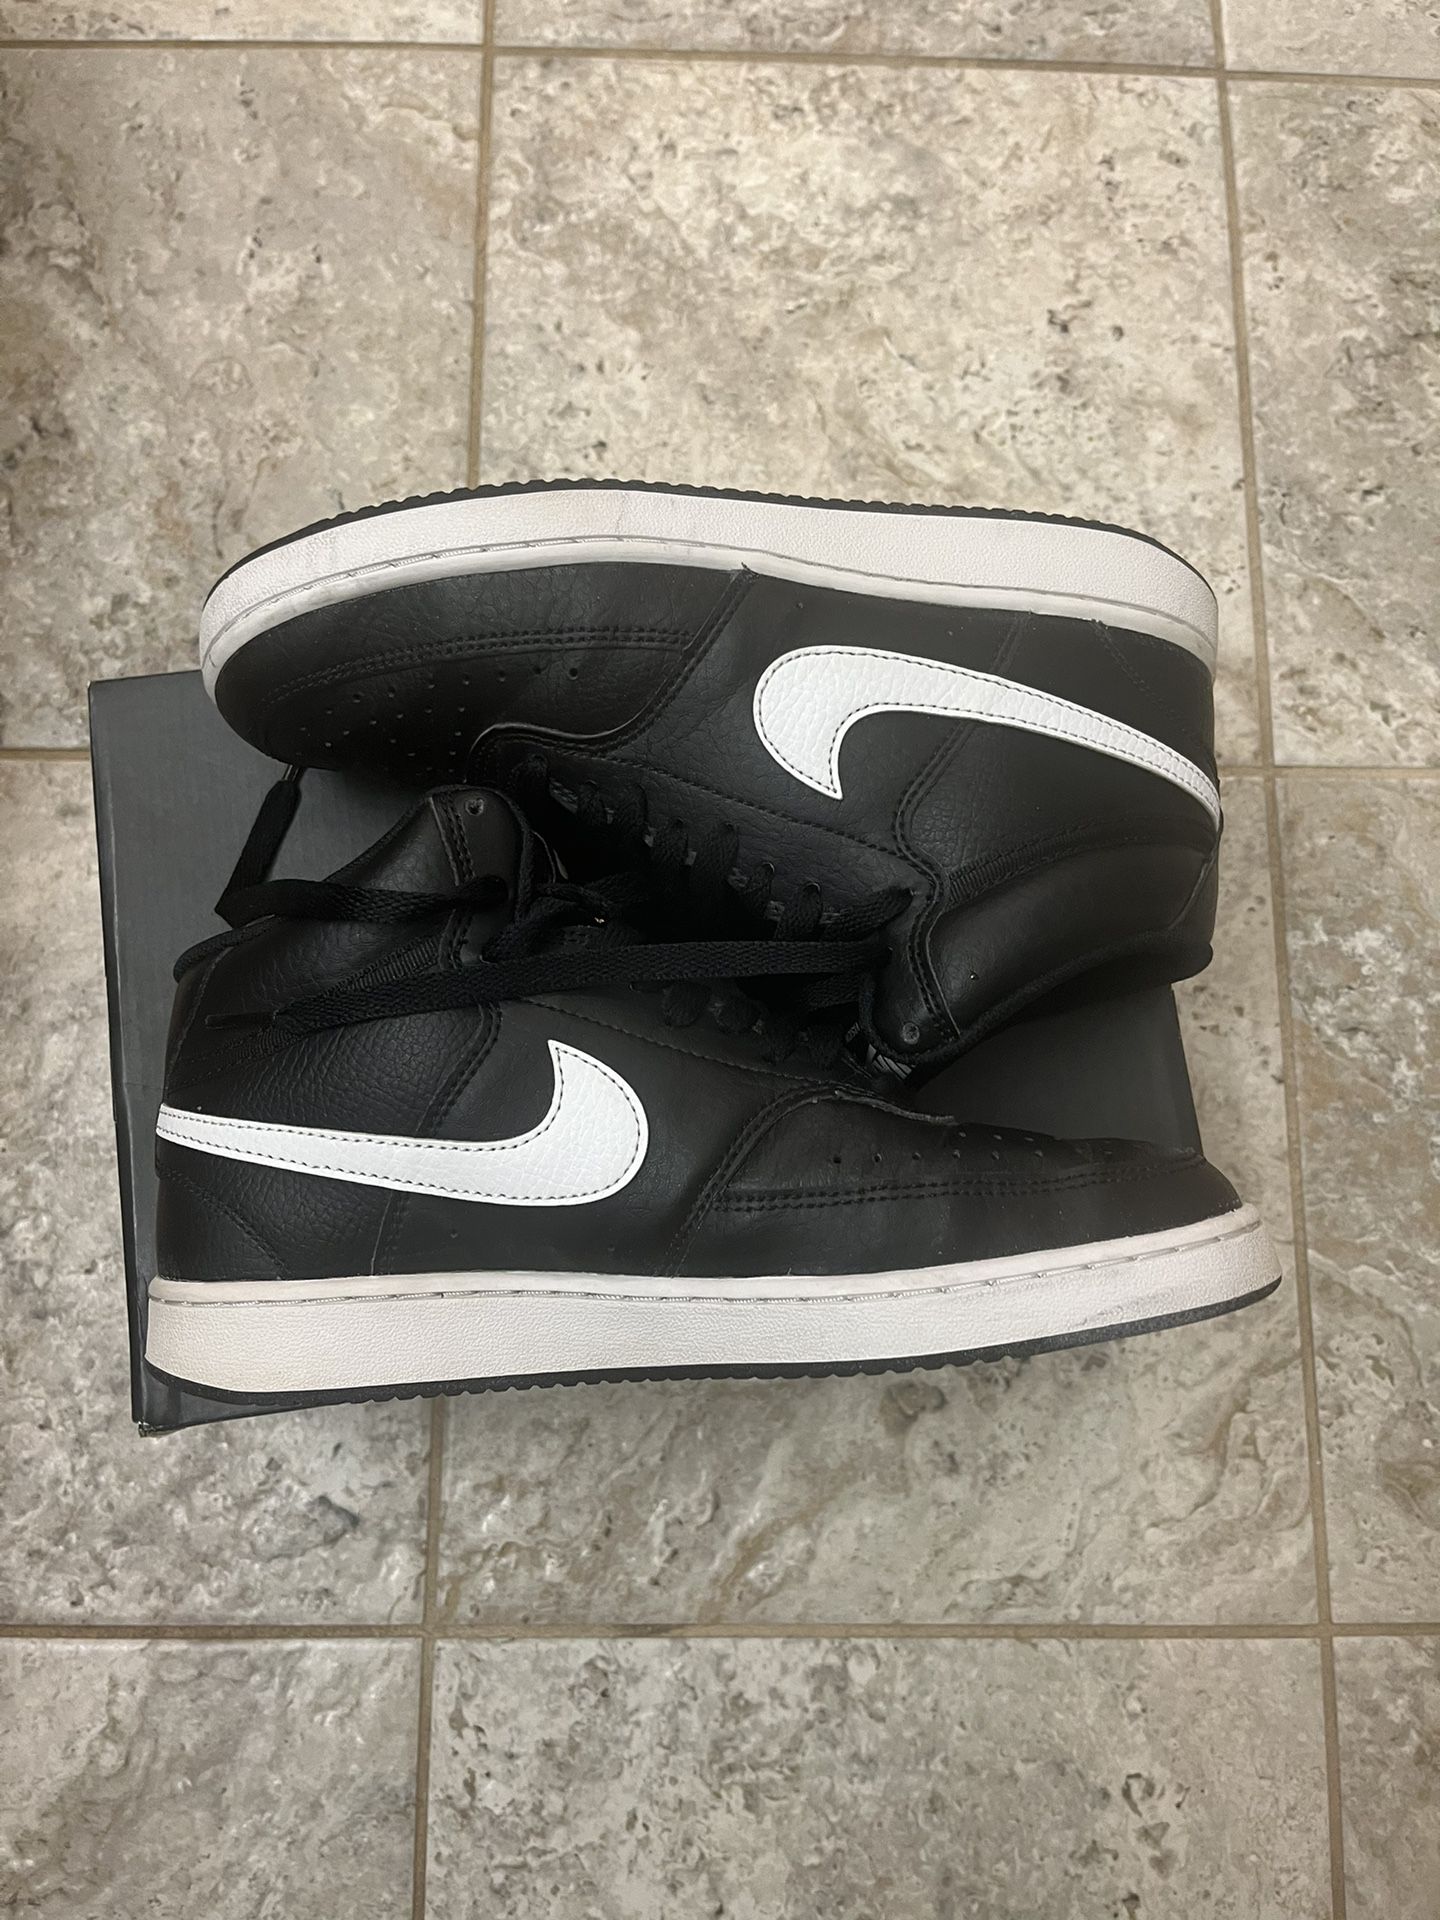 Women’s Size 8 Mid top Nike Shoes